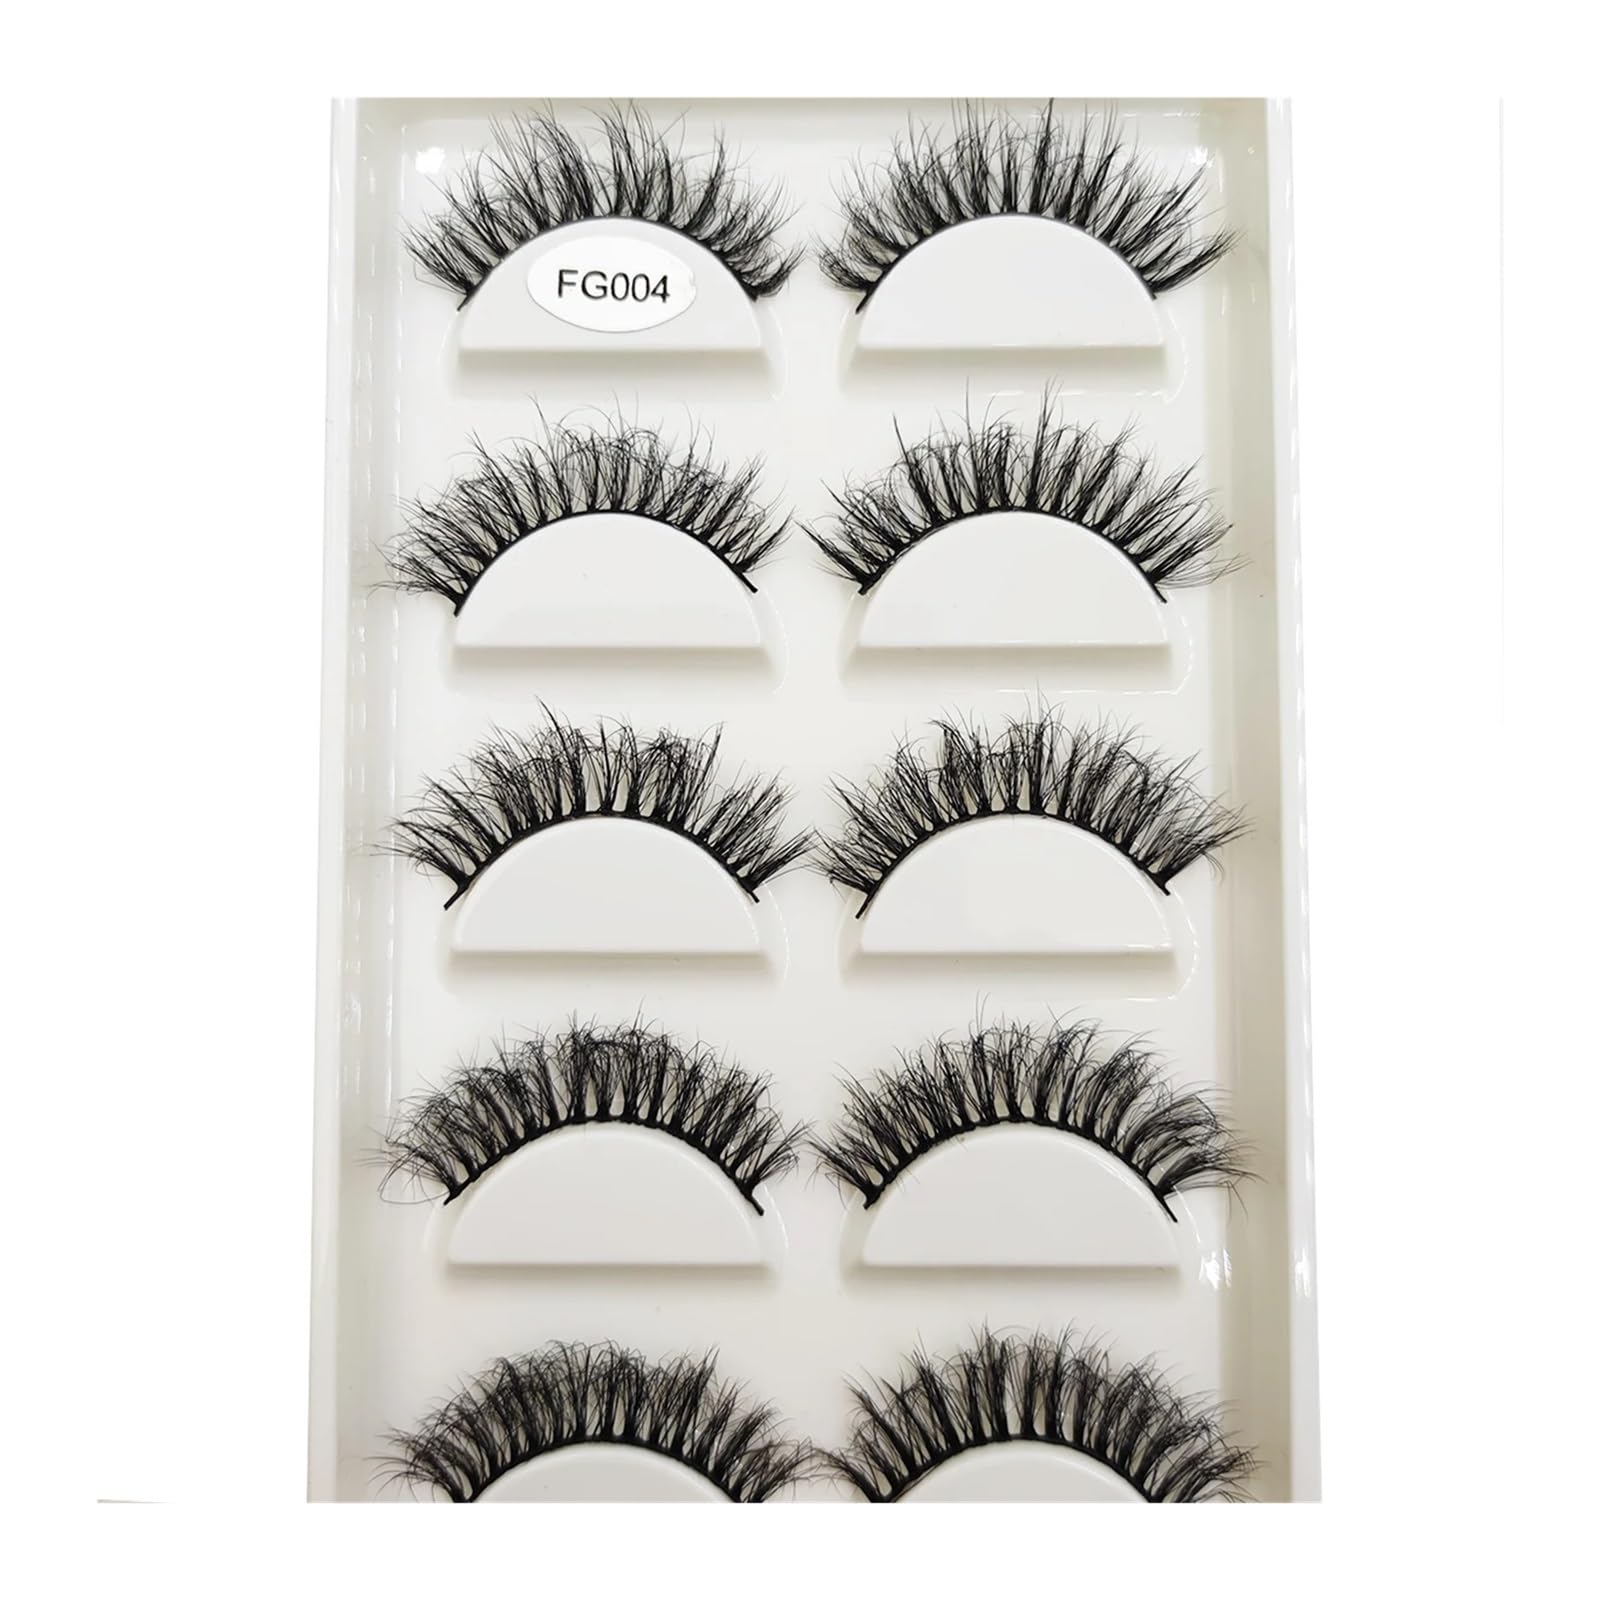 FULIMEI 16 Stil 5 0/100 Paar dicke Wimpern natürliche falsche Wimpern weiche gefälschte Wimpern Wispy Make-up Faux (Color : 5 Pairs FG004, Size : 50 Boxes 250 Pairs)